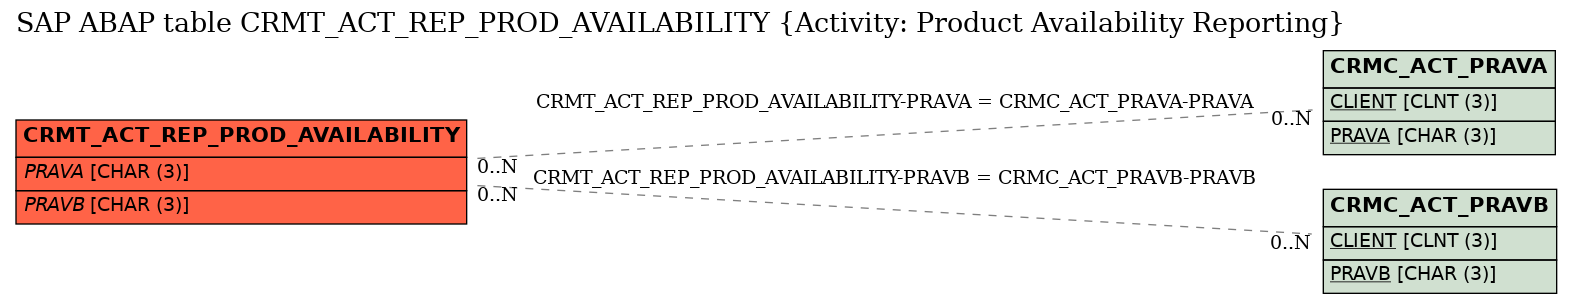 E-R Diagram for table CRMT_ACT_REP_PROD_AVAILABILITY (Activity: Product Availability Reporting)